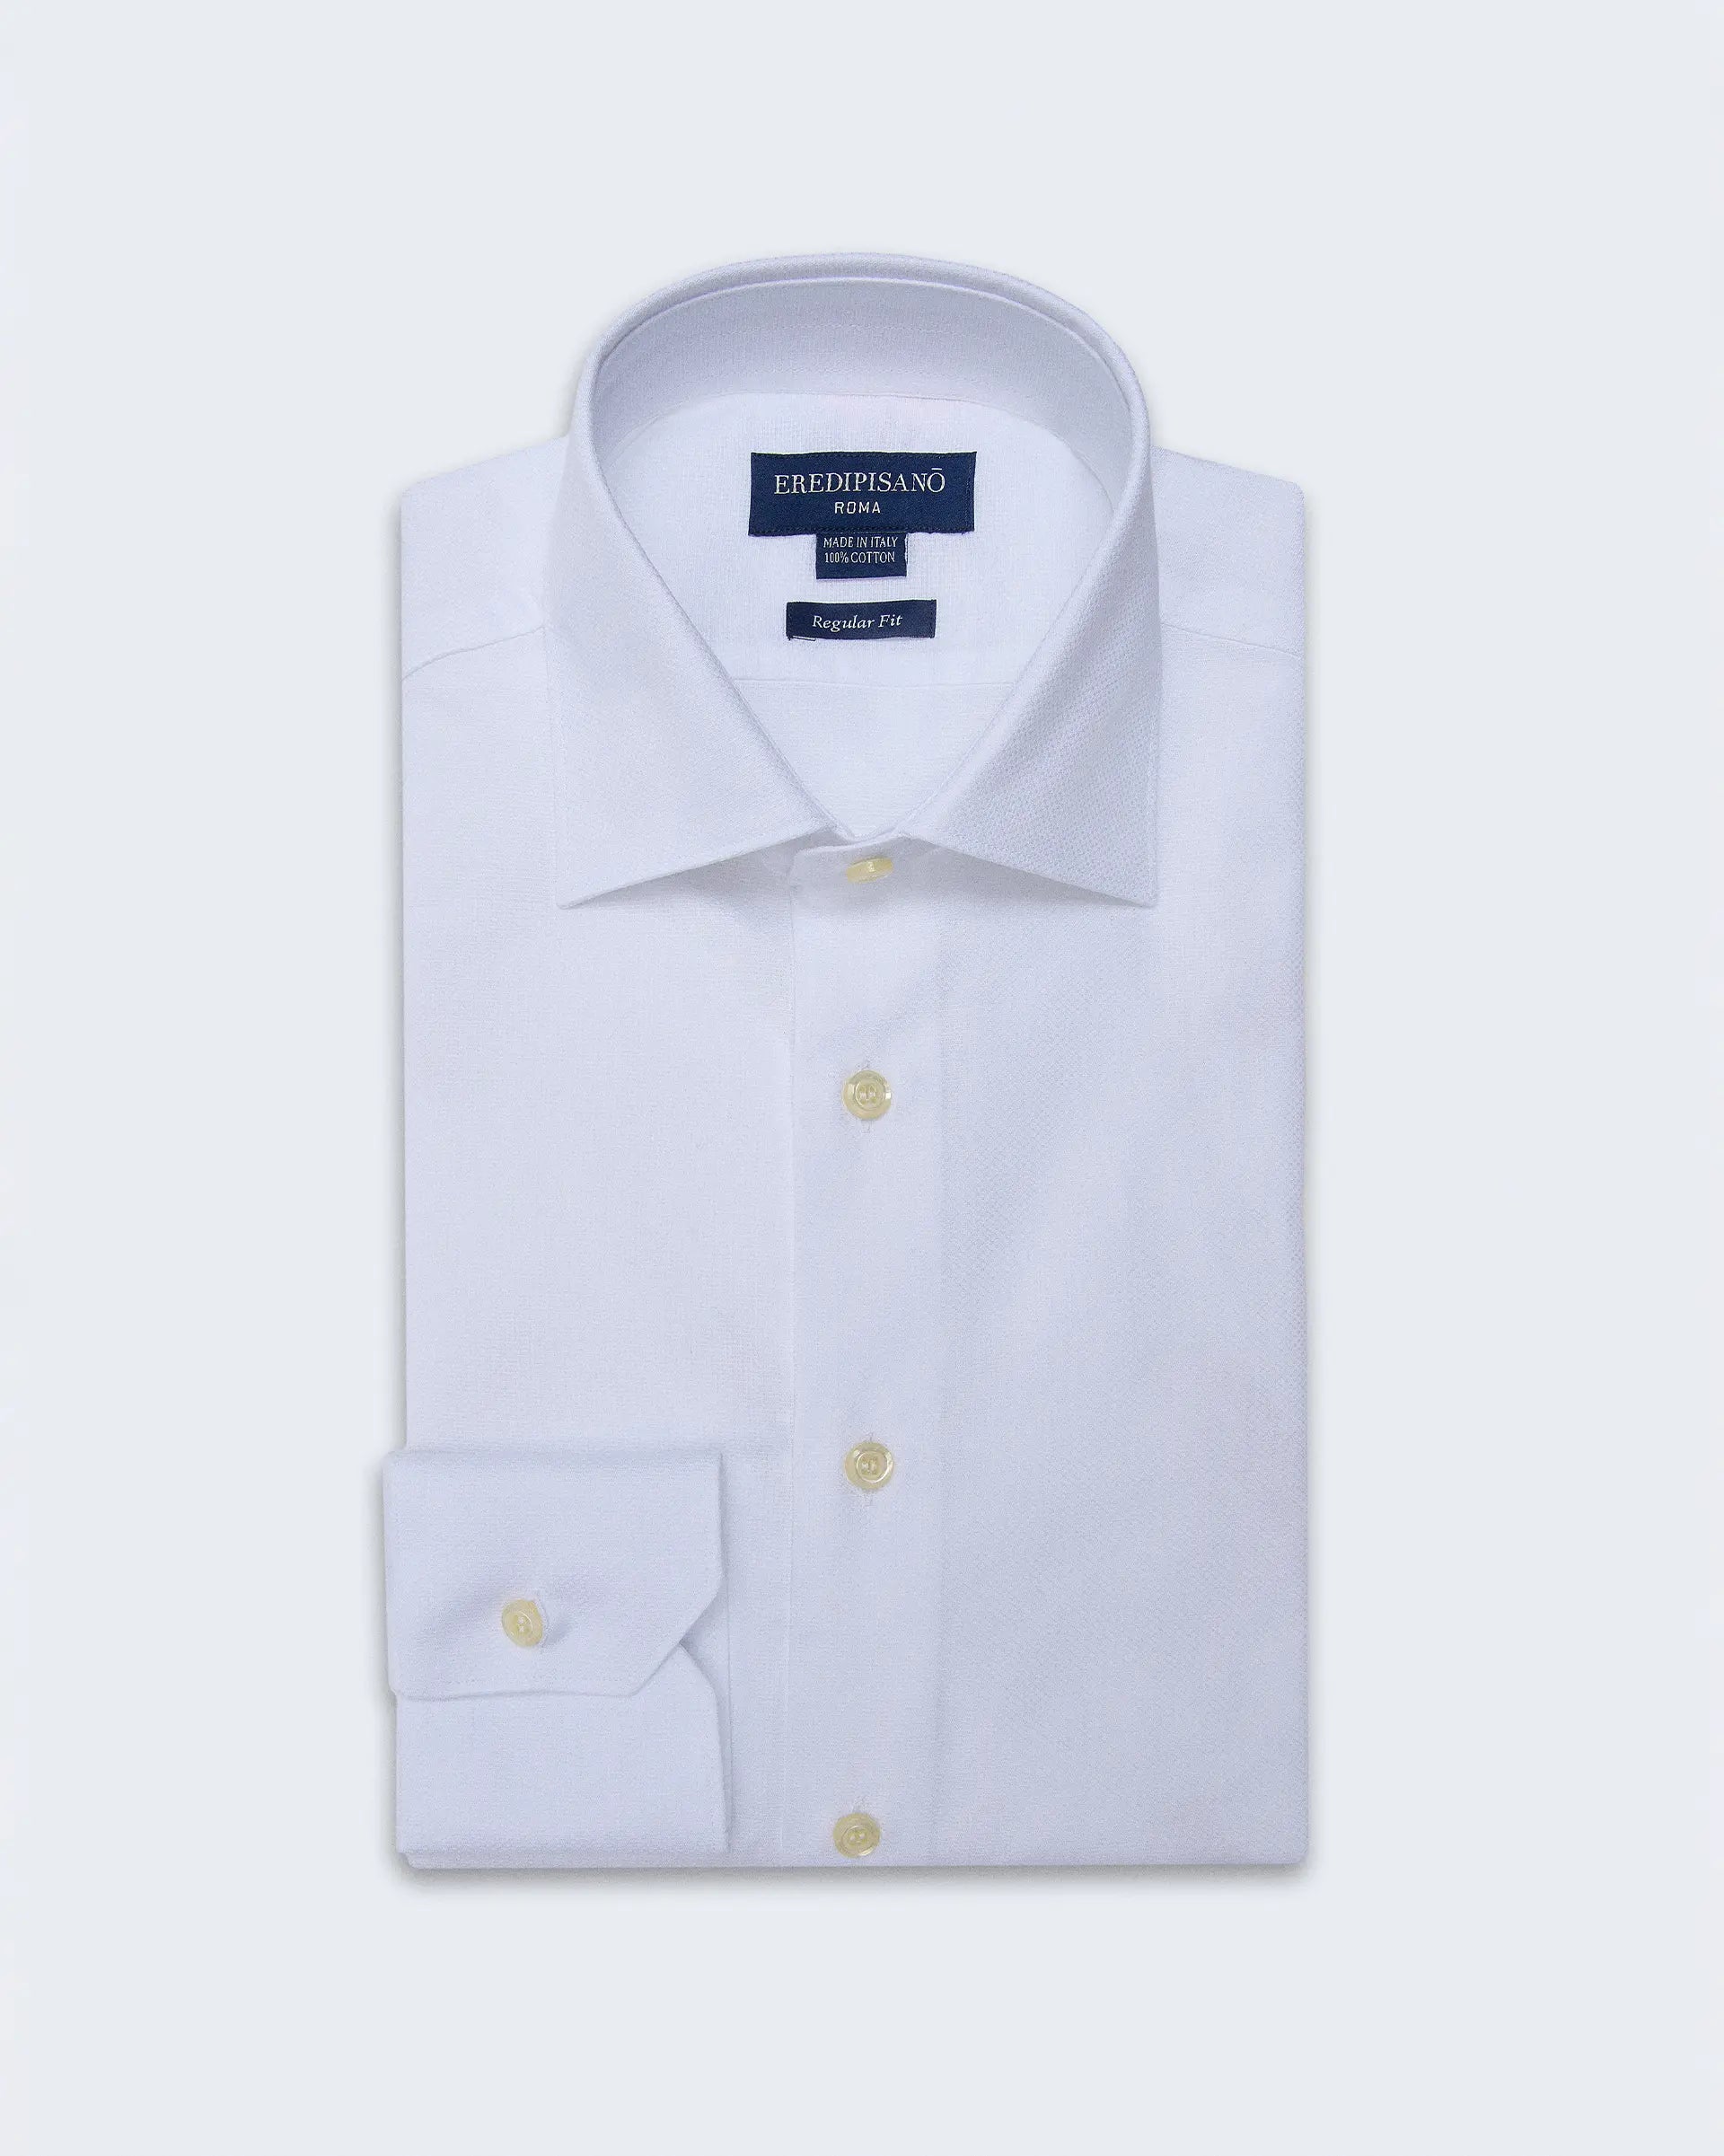 Regular fit white shirt in textured oxford cotton with Milan collar